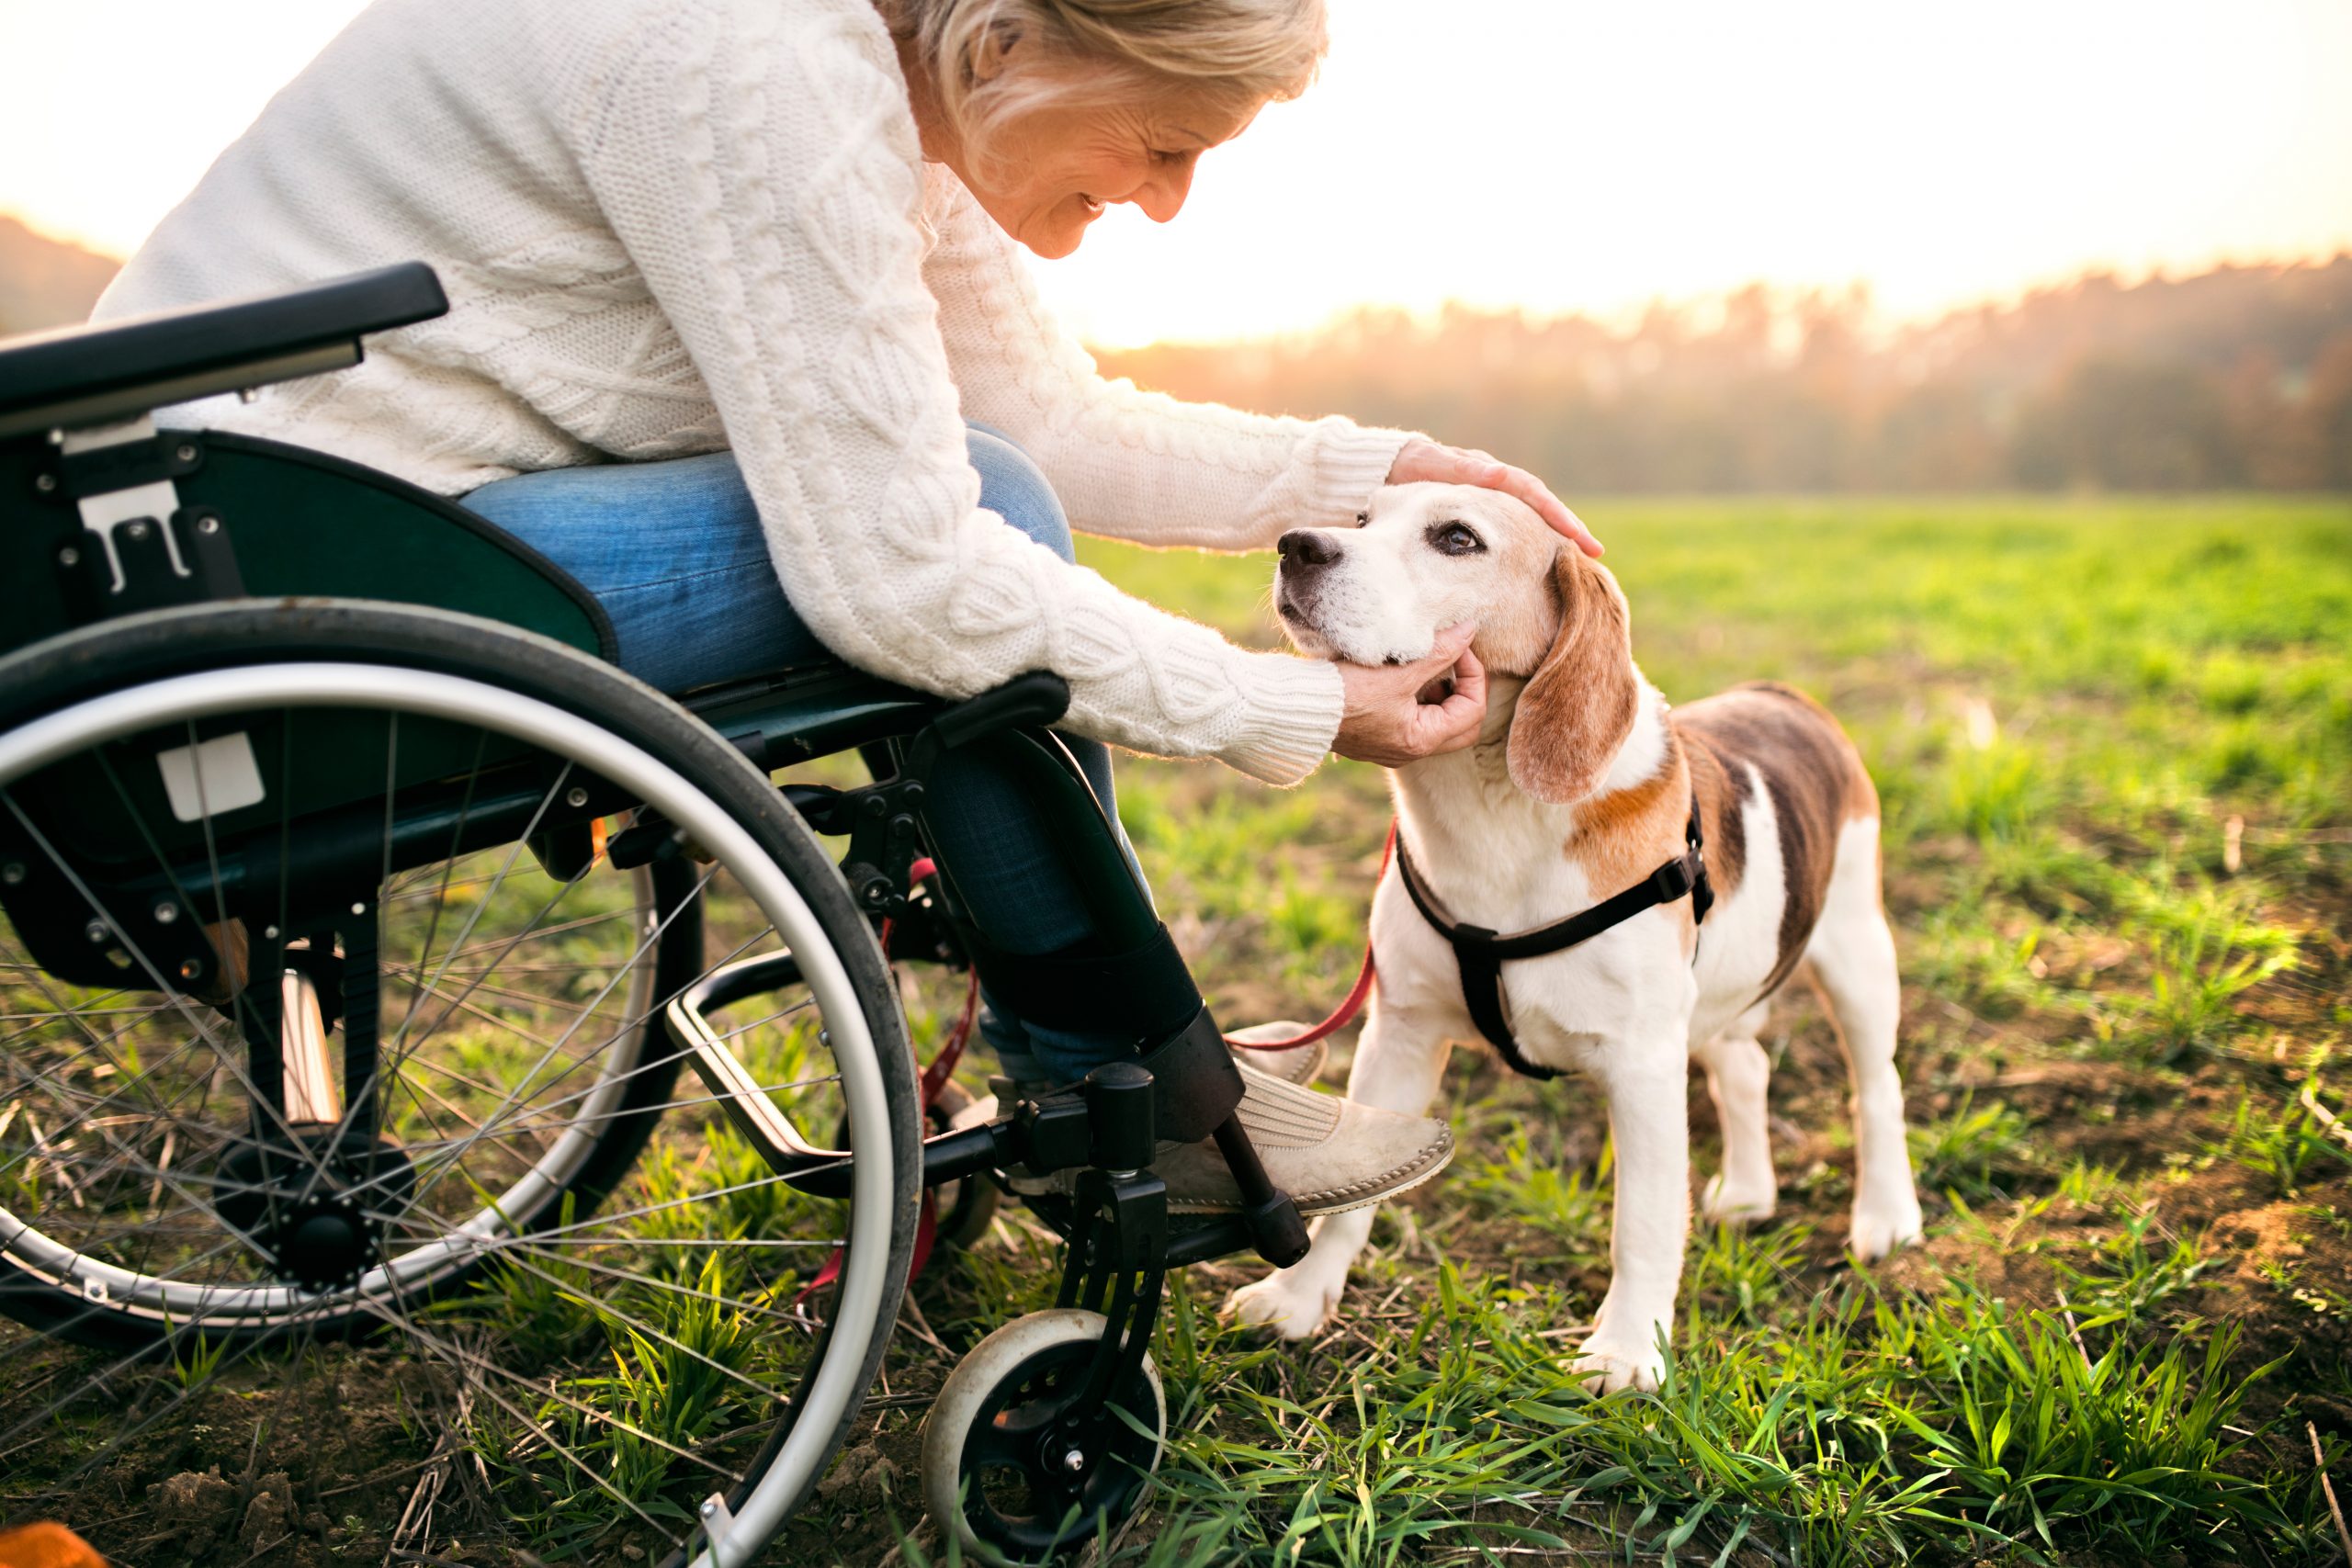 A senior woman in a wheelchair leans down to pet her dog outside.